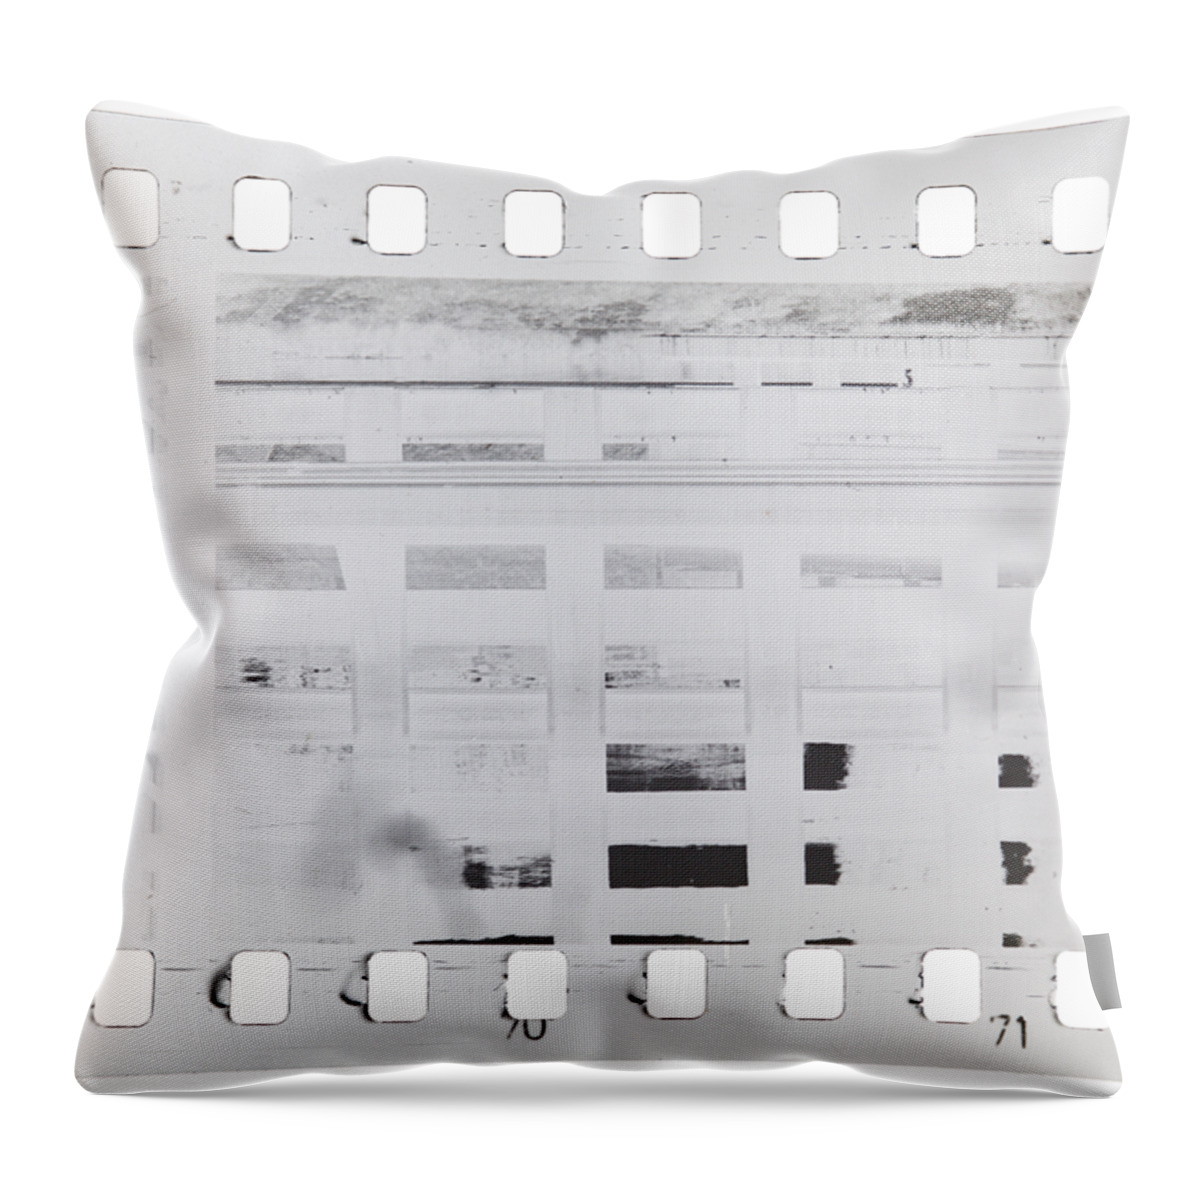 Film Throw Pillow featuring the photograph Celluloid film by Michal Boubin